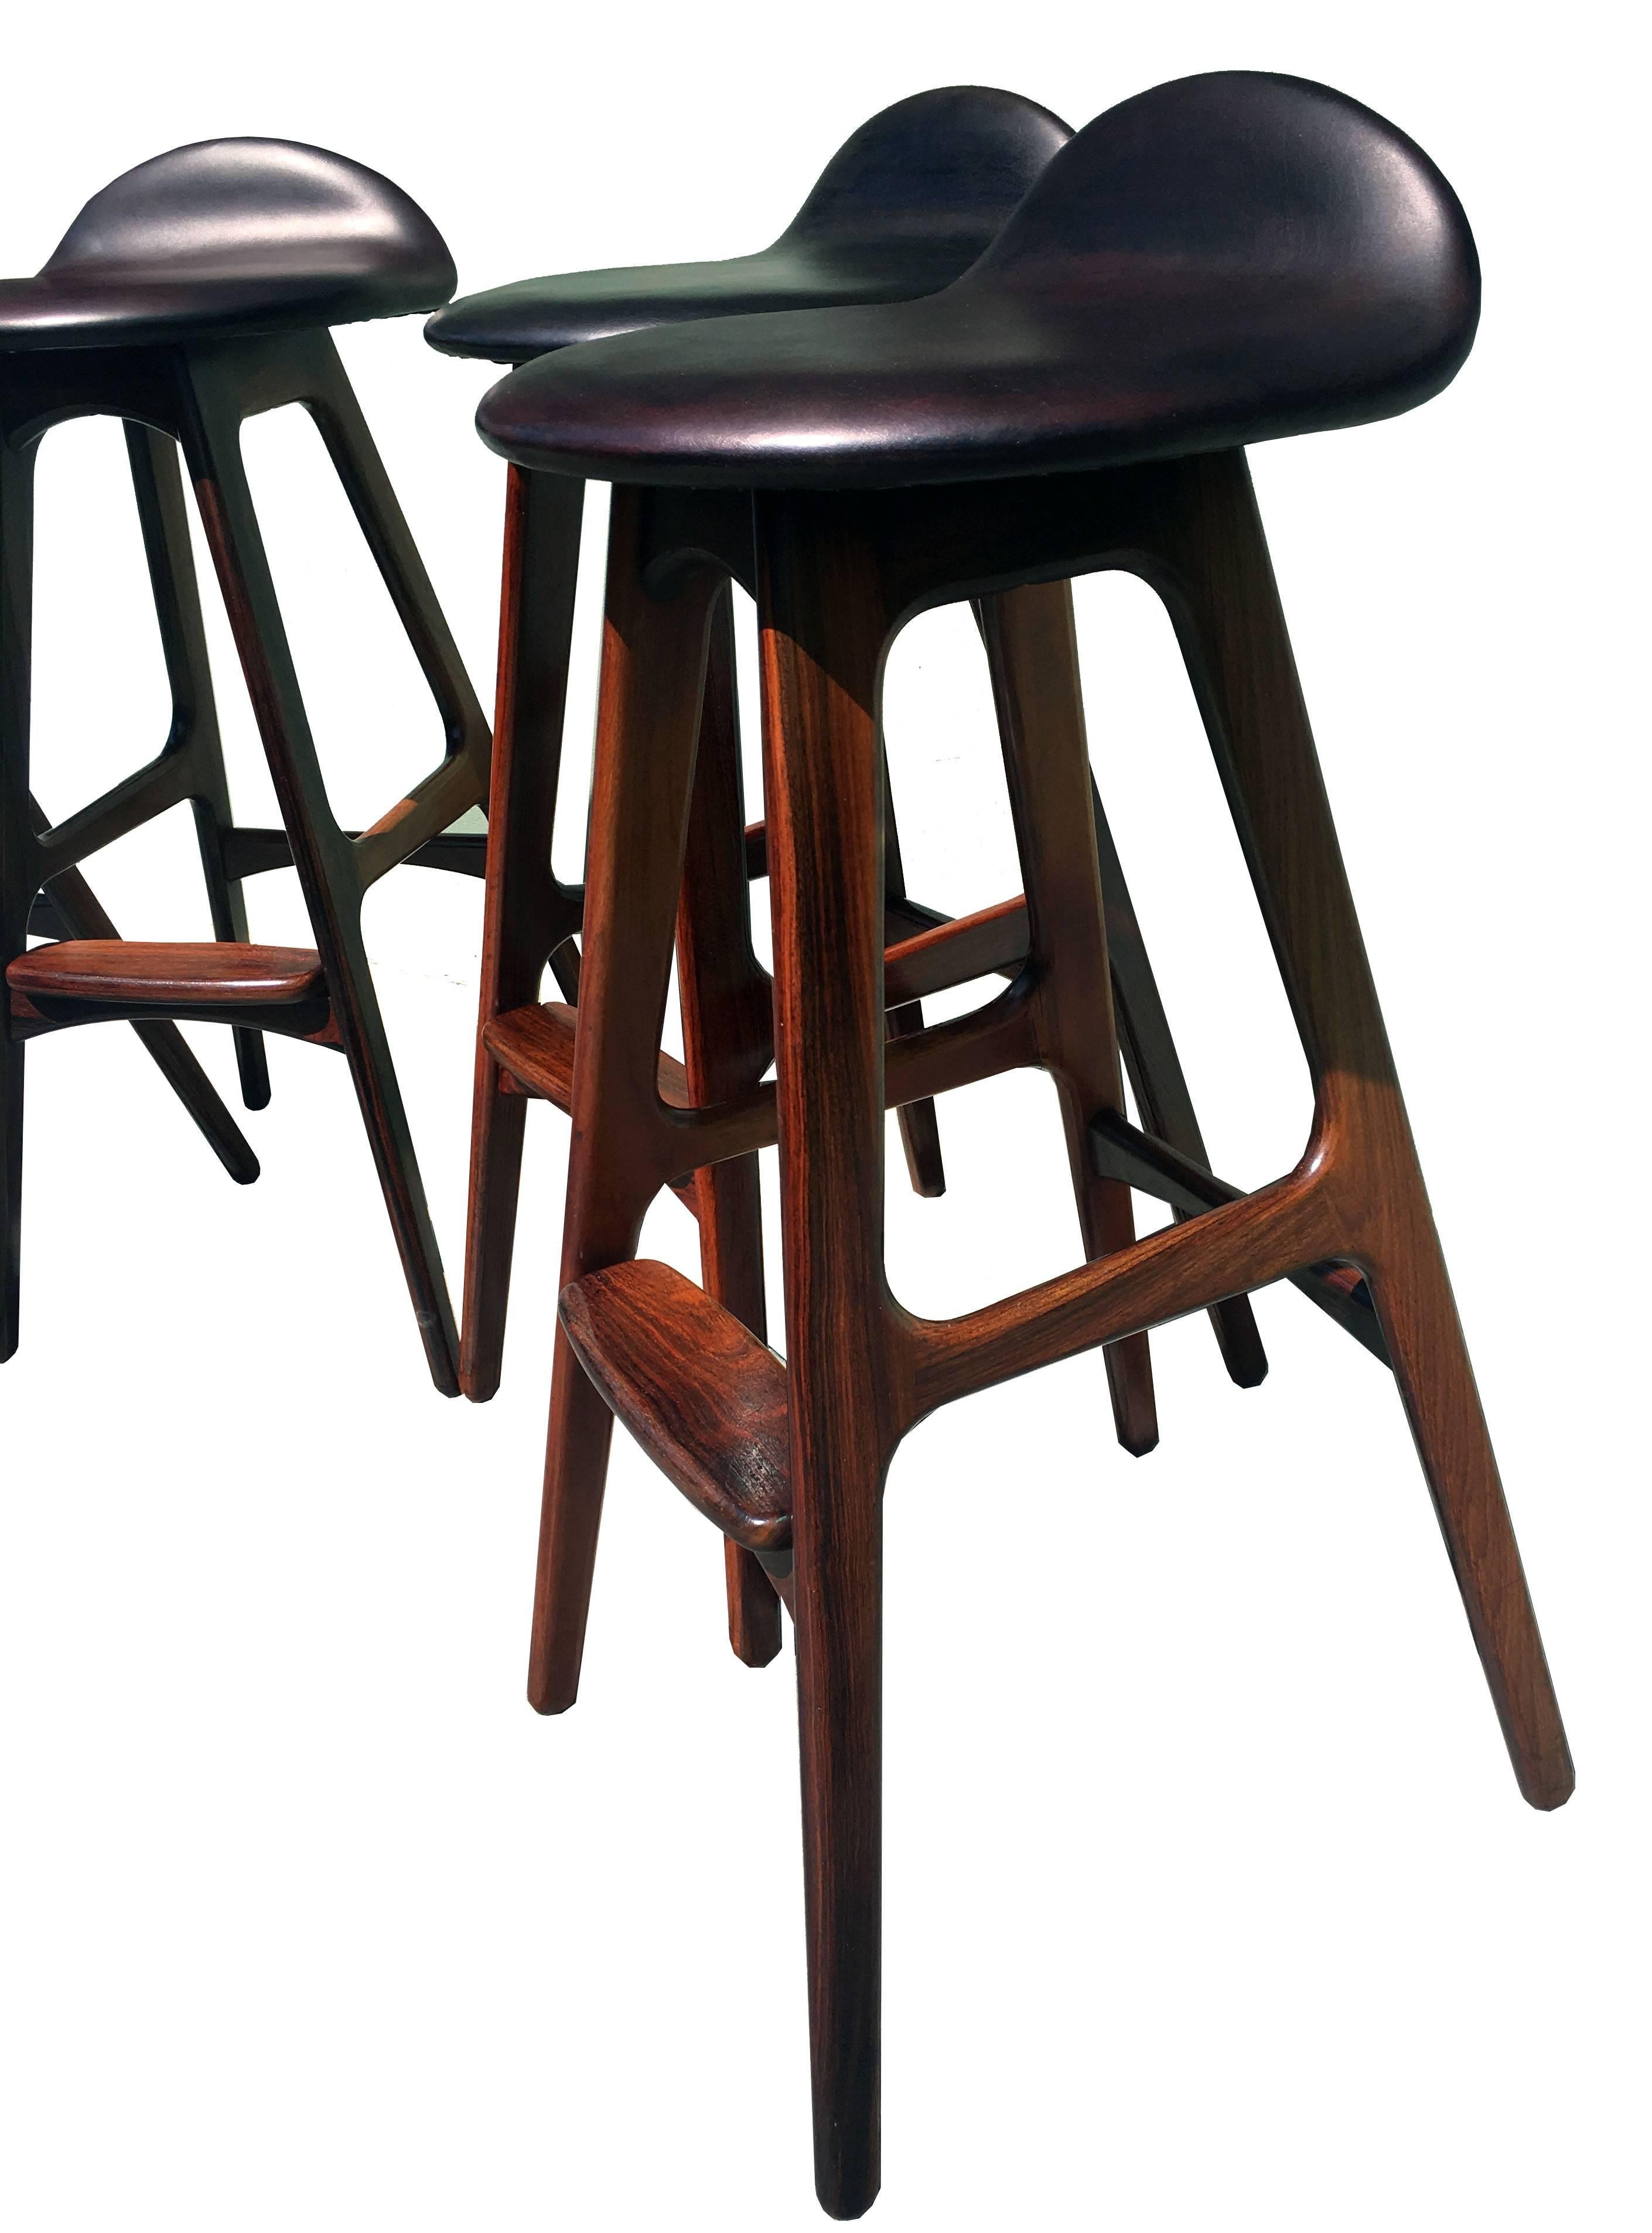 A nice original vintage set of the most classic barstools from Erik Buch and Dyrlund, all in nice condition.